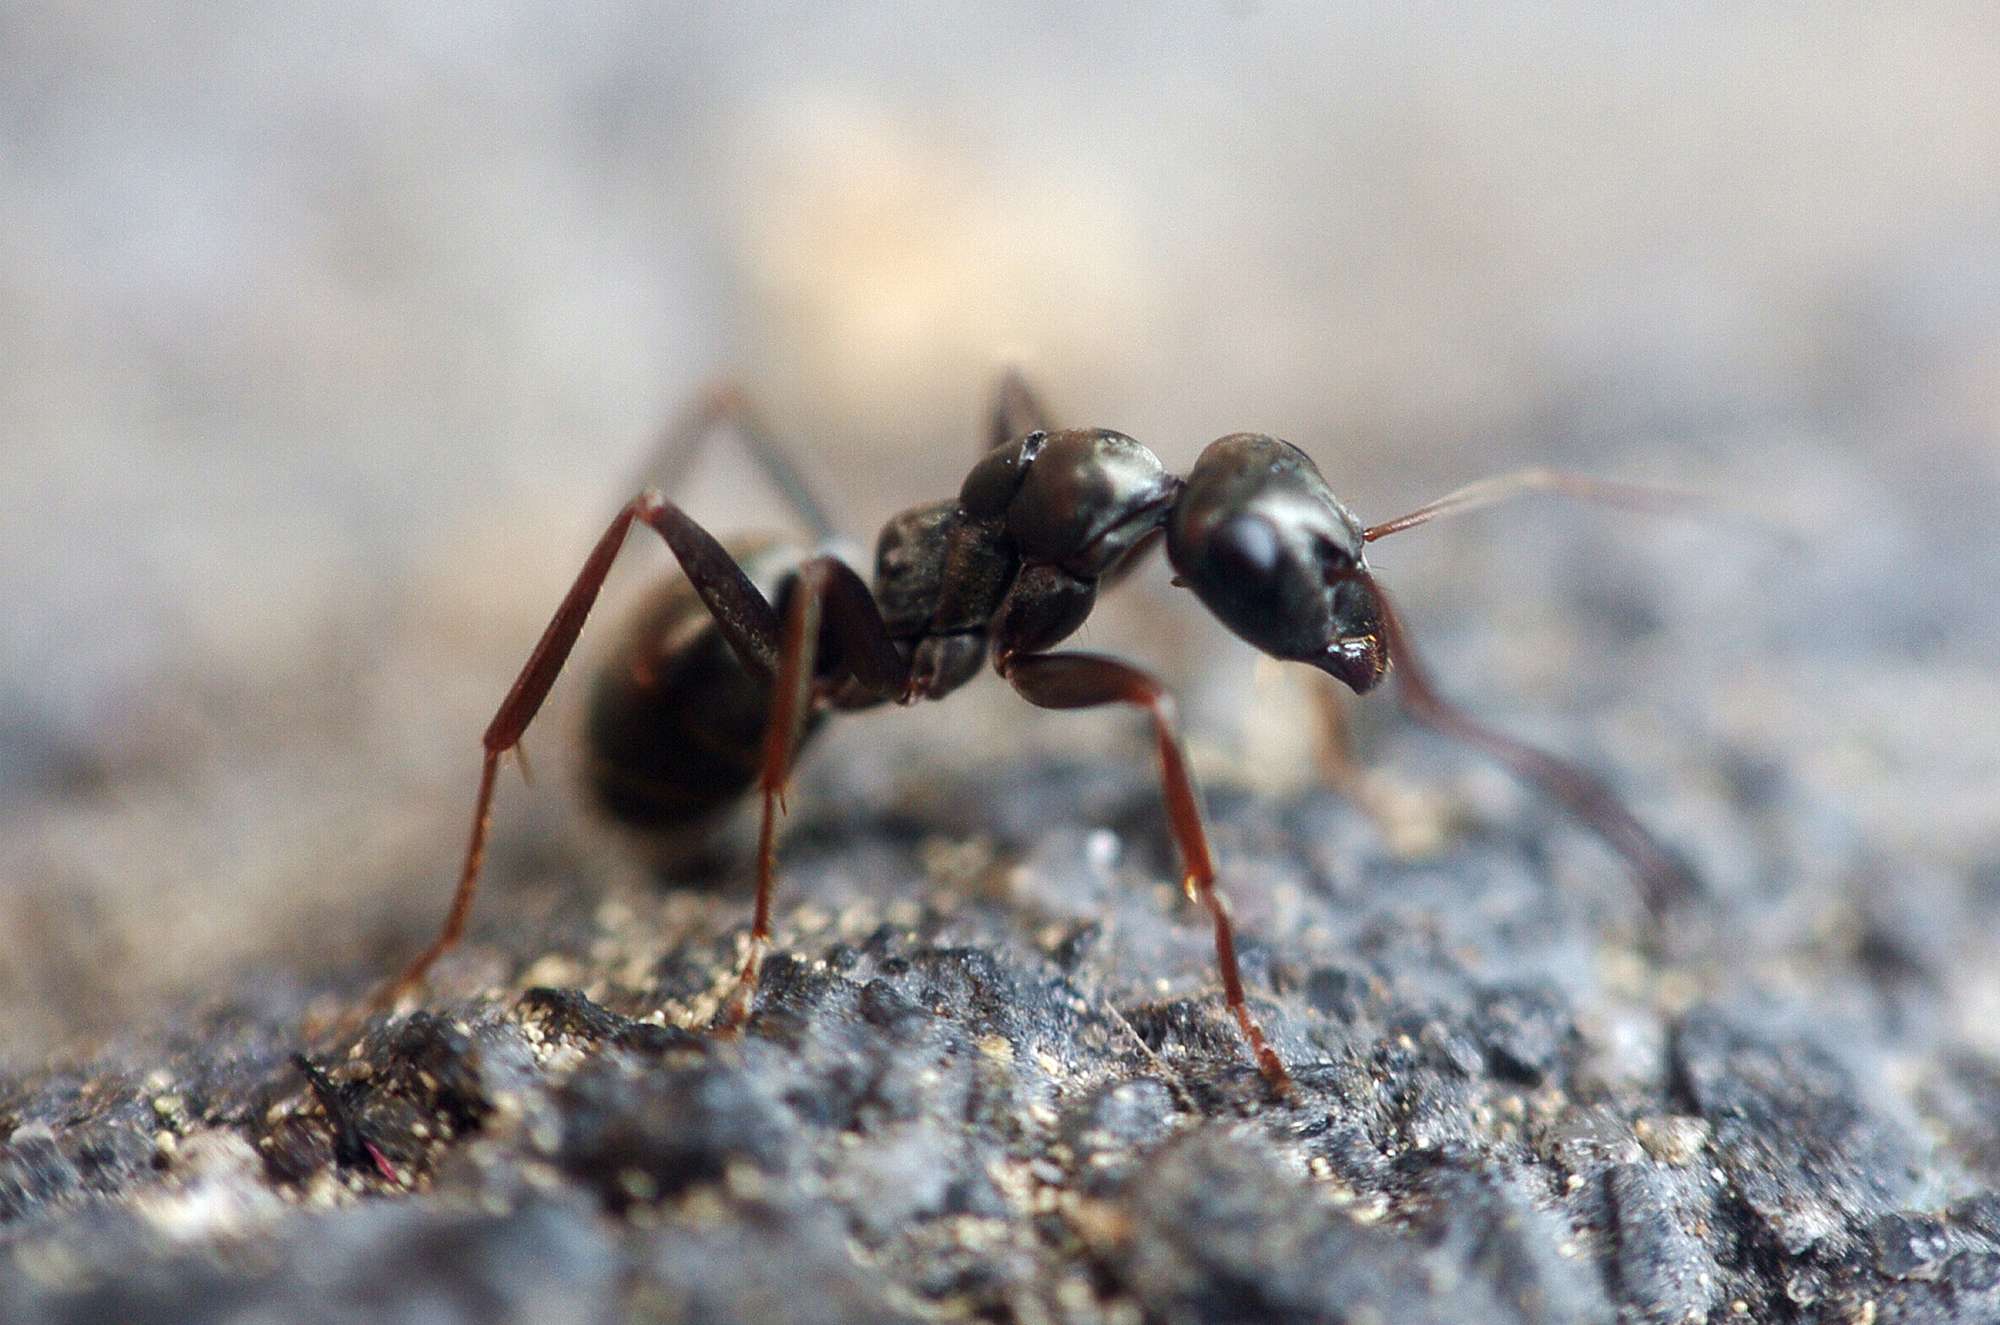 Close-up of a black ant with brown/reddish legs